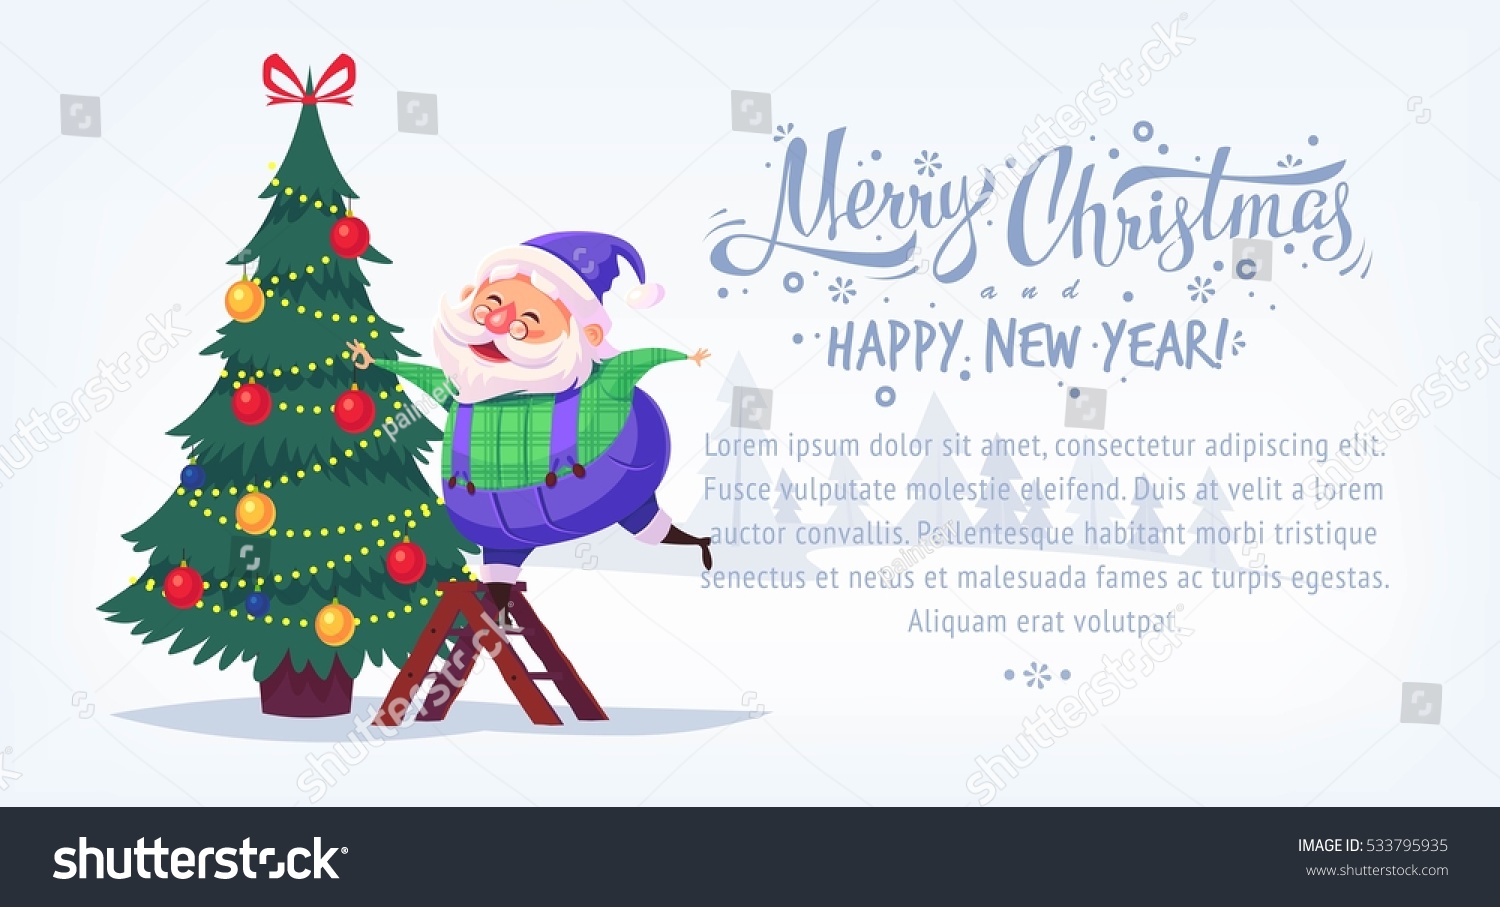 Cute cartoon blue suit Santa Claus decorating Christmas tree Merry Christmas vector illustration Greeting card poster